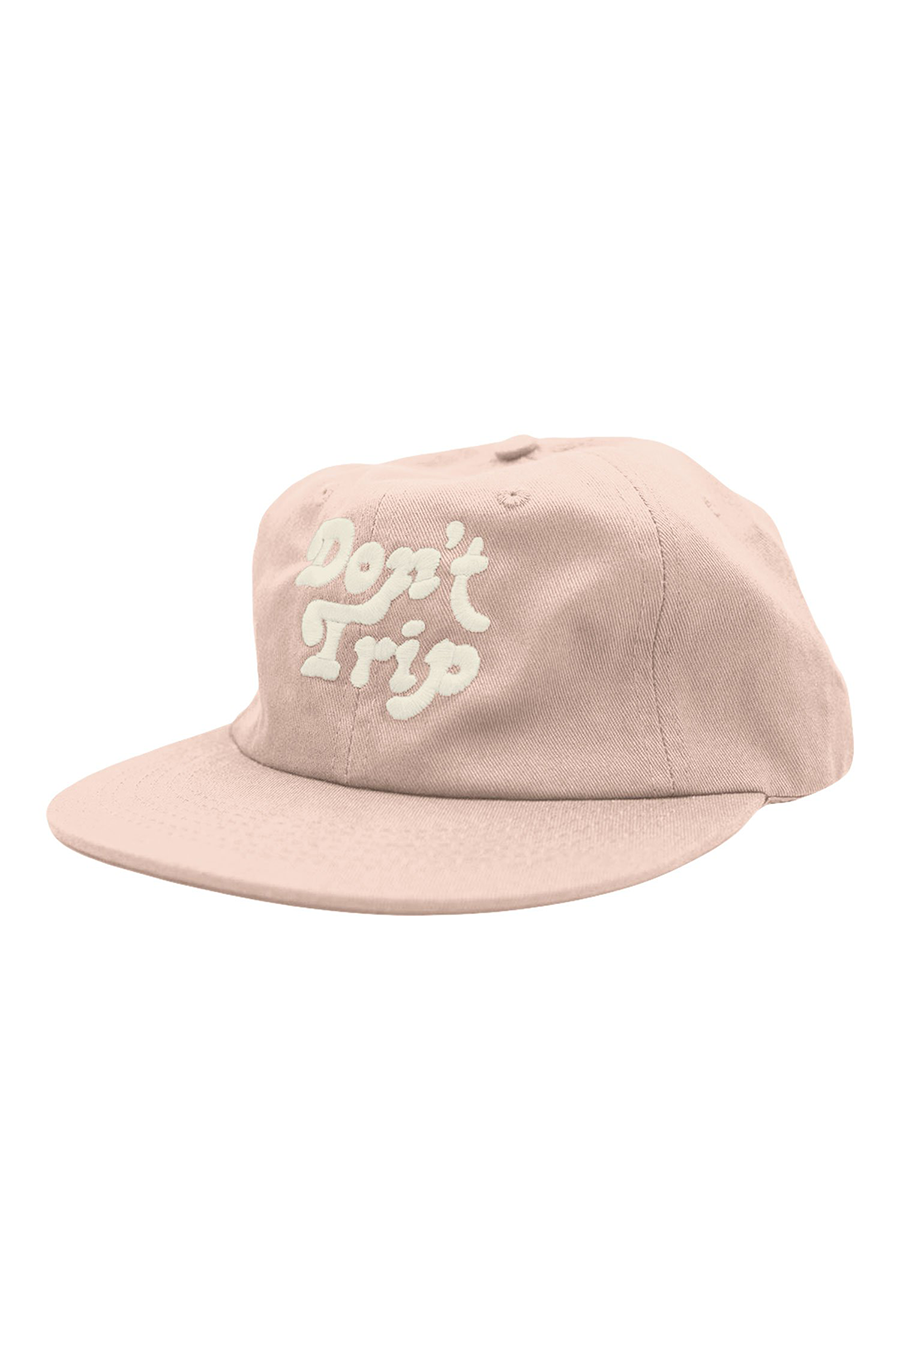 Don't Trip Unconstructed Hat | Rose Water - Main Image Number 1 of 1